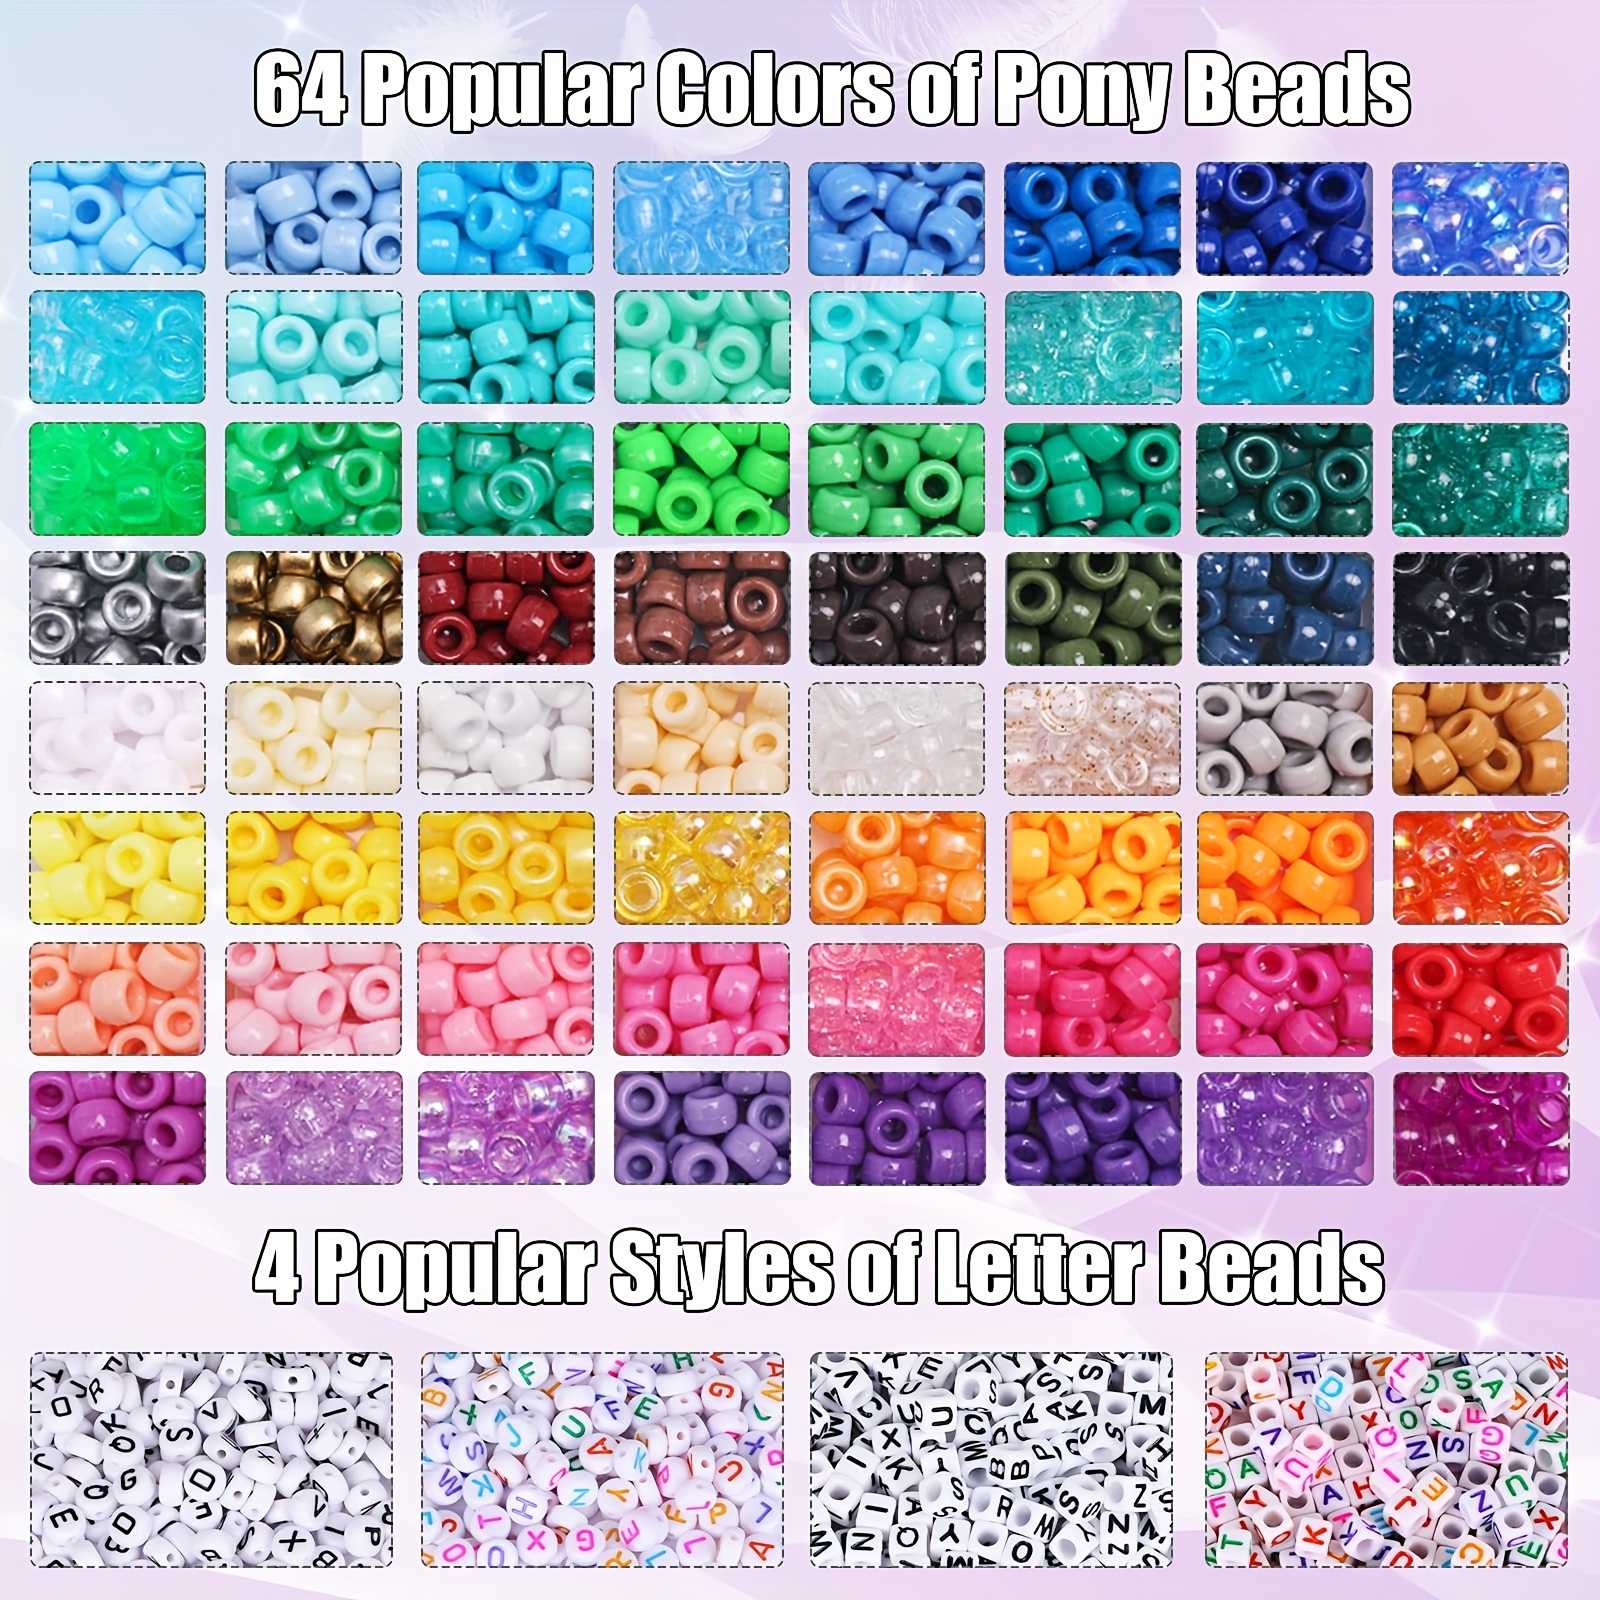  Pony Beads, 3,300 pcs 9mm Pony Beads Set in 23 Colors with  Letter Beads, Star Beads and Elastic String for Bracelet Jewelry Making by  INSCRAFT : Arts, Crafts & Sewing